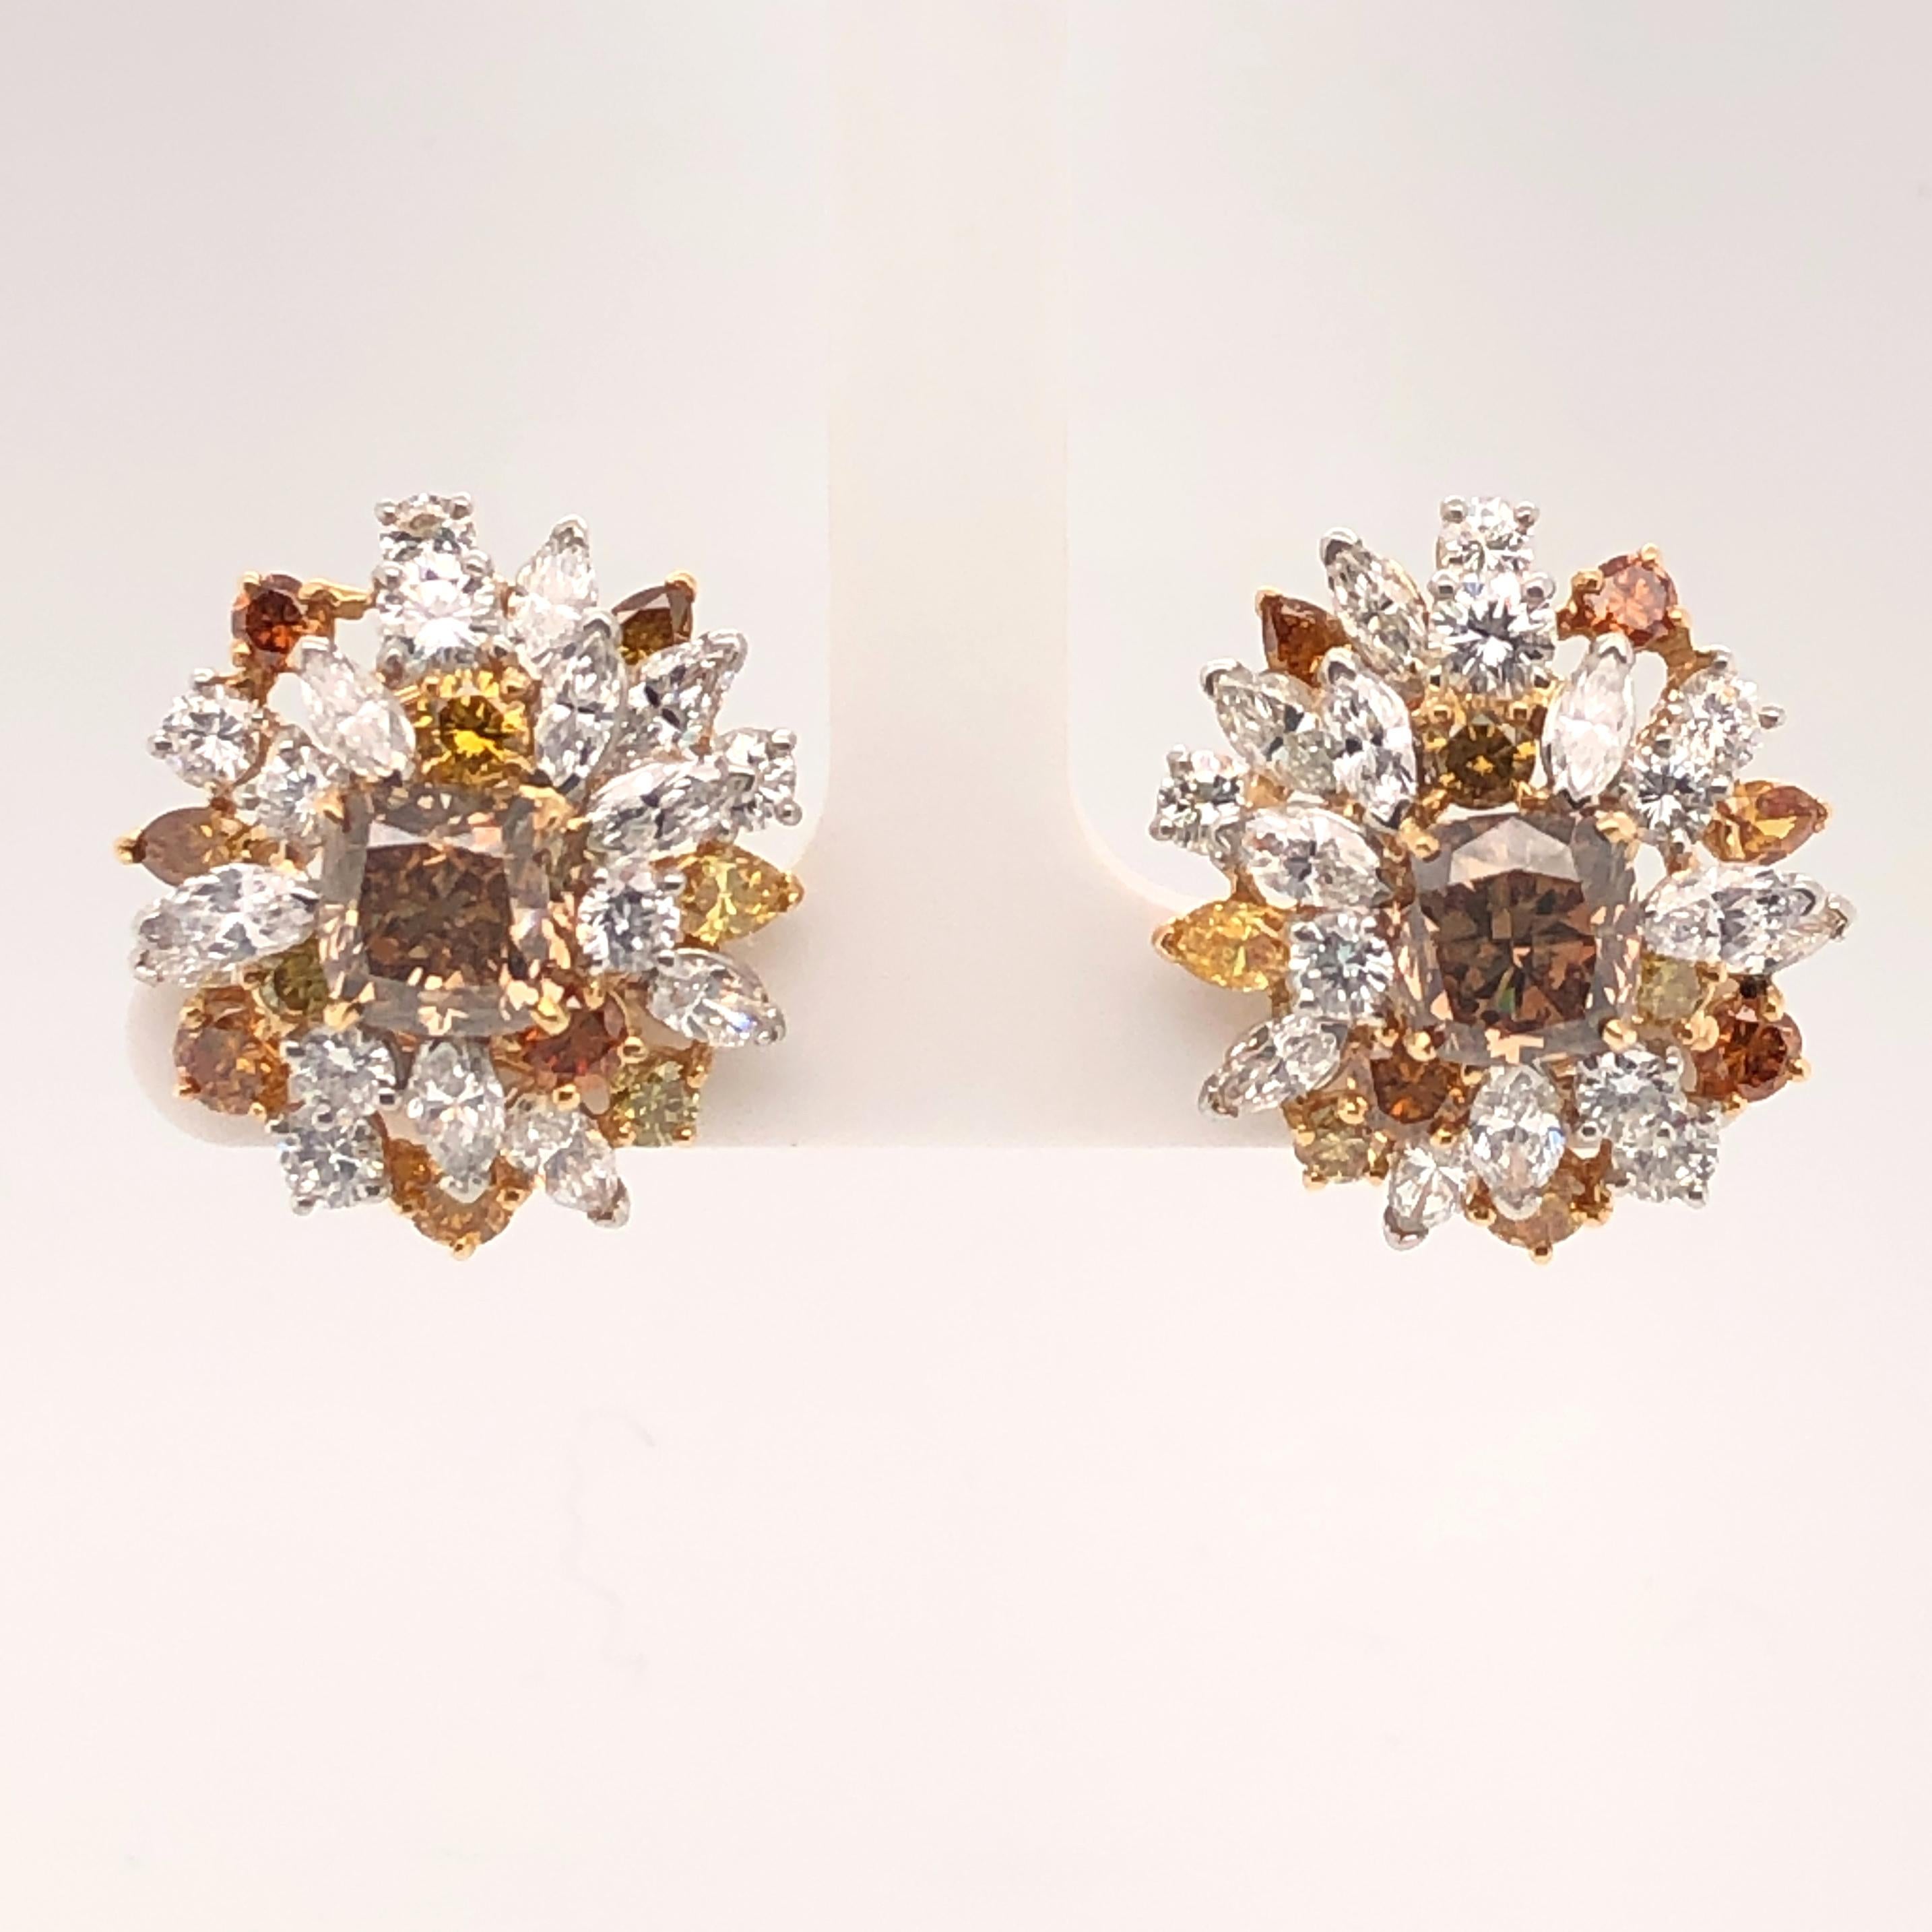 Oscar Heyman platinum and 18 karat gold earrings contain 2 cushion cognac diamonds (6.01cts, SI1 - SI2), 16 round diamonds 1.82cts, 20 marquise diamonds 3.00cts, and 20 assorted shape fancy colored diamonds 2.70cts. It is stamped with the makers